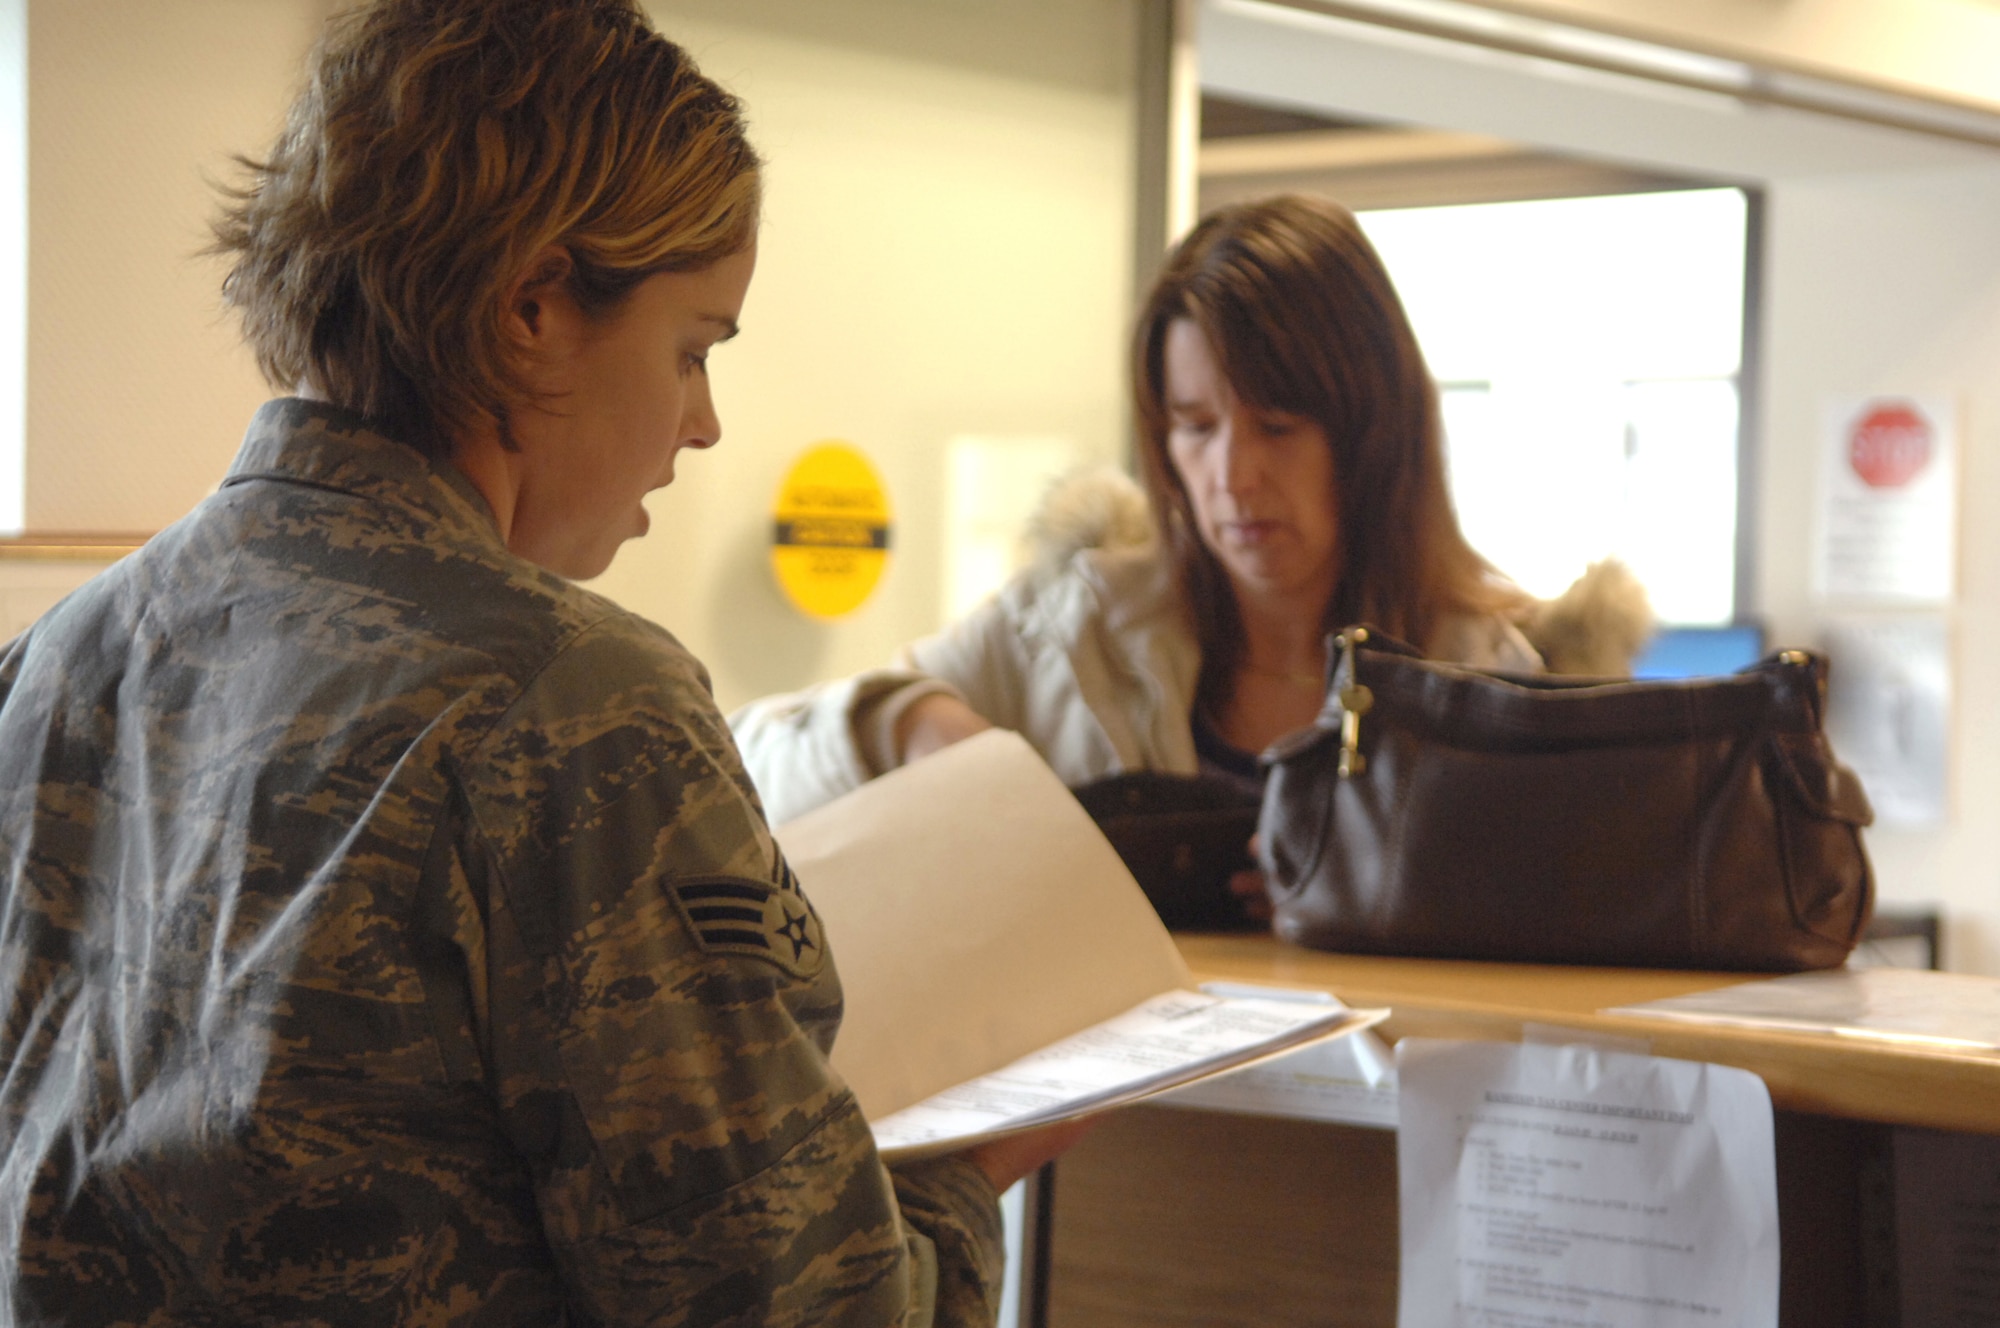 Senior Airman Amanda O'Hara, 435th Air Base Wing paralegal, assists a law center customer with Power of Attorney documents.  Airman O'Hara, a Charlotte N.C. native, joined the Air Force four years ago and has enjoyed nearly every minute of it. (Air Force photo by Tech. Sgt. Michael Voss)